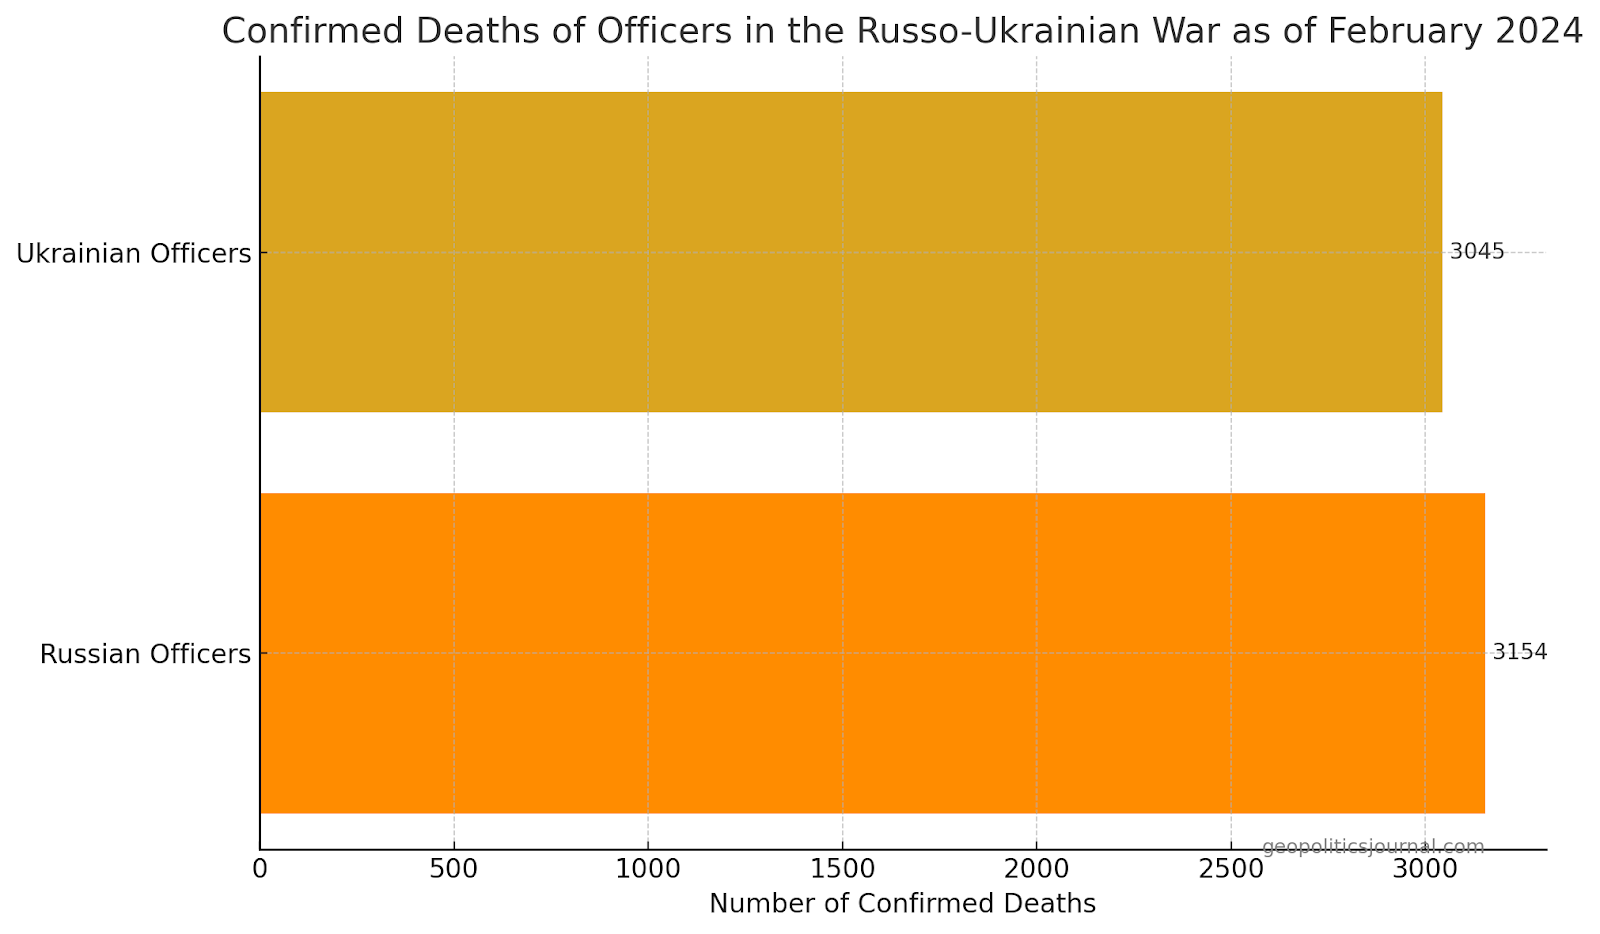 The visualization compares the confirmed deaths of officers between Russian and Ukrainian forces in the Russo-Ukrainian War up to February 2024.